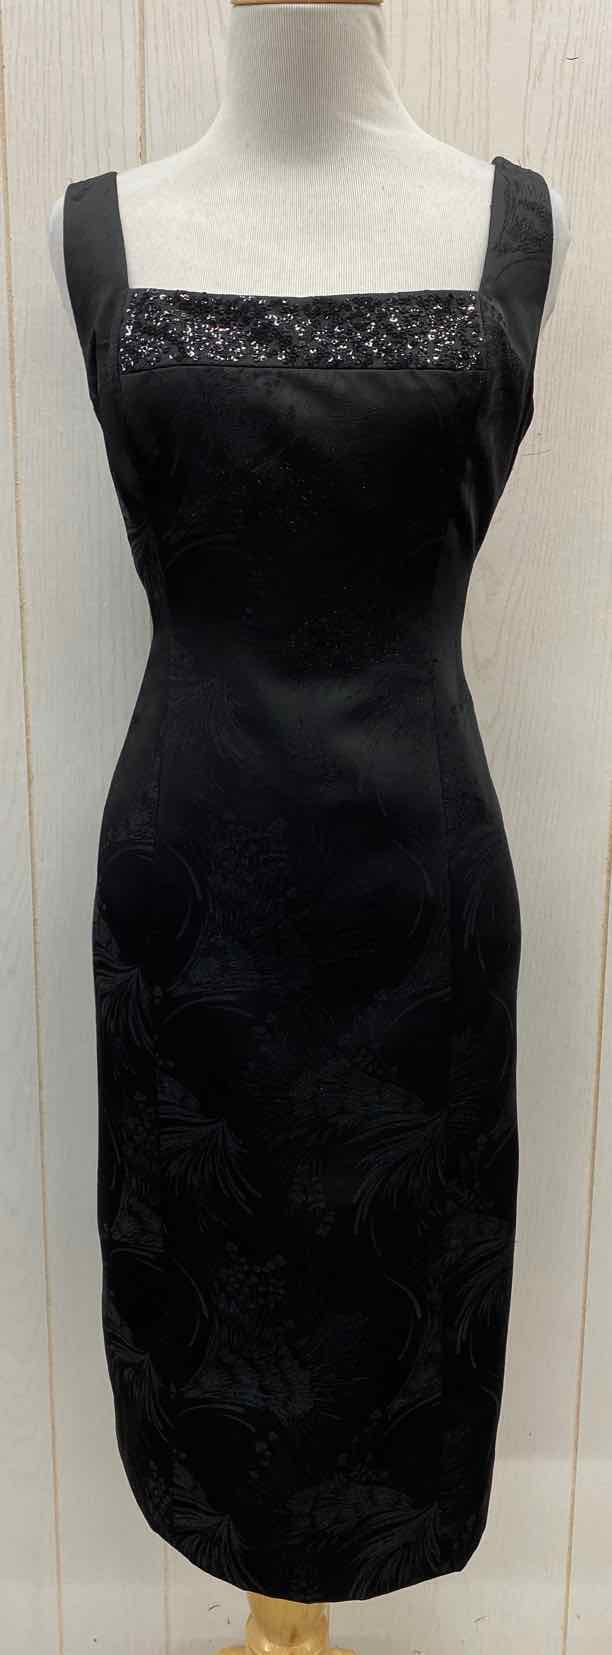 Evan Picone Black Womens Size 6 Dress – Twice As Nice Consignments